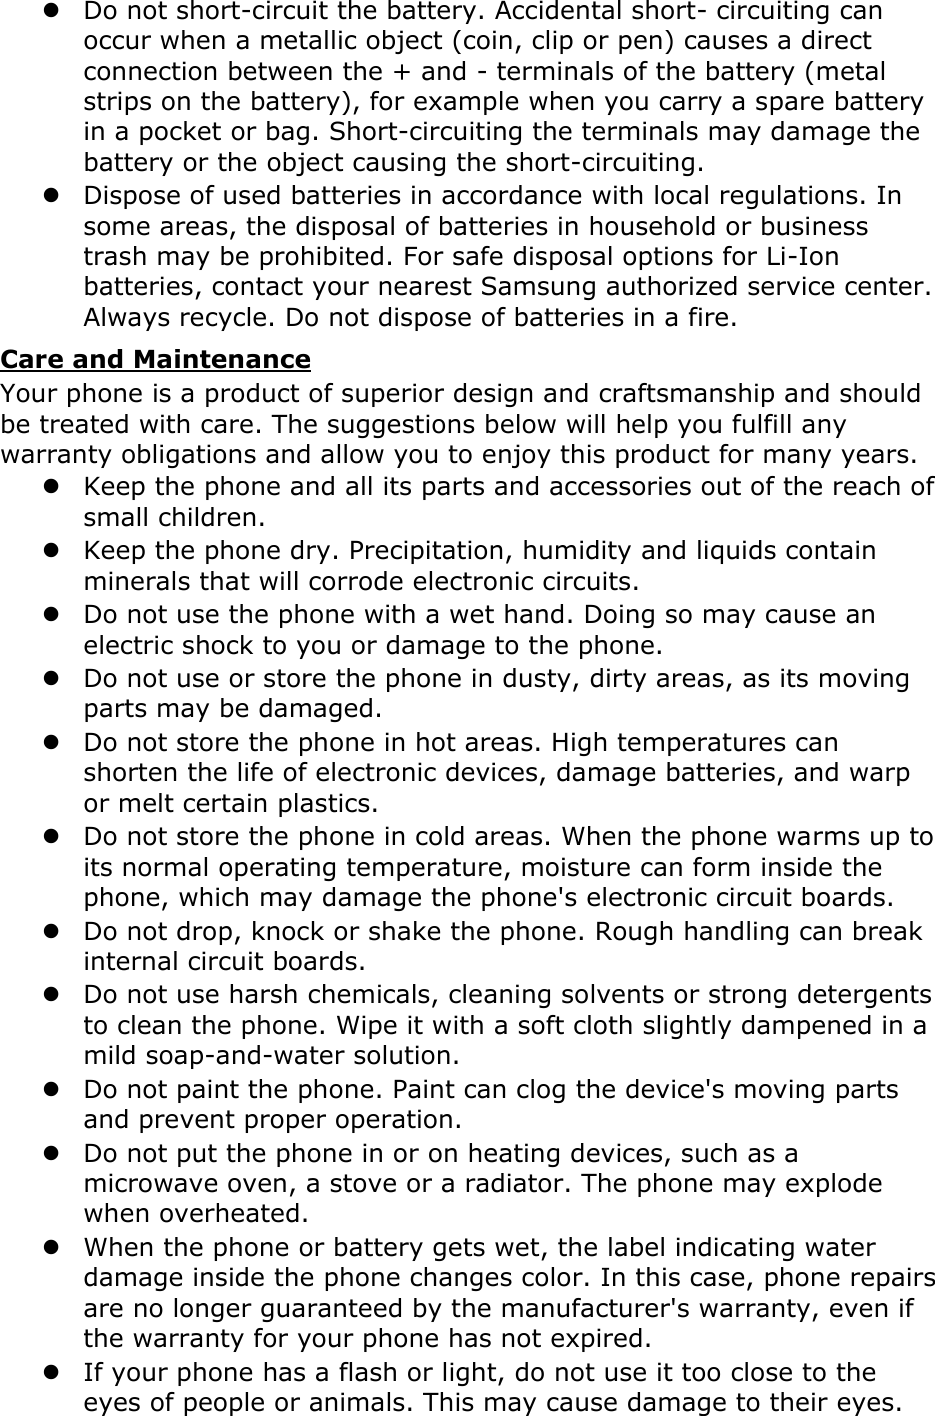 Page 20 of Samsung Electronics Co GTB5330 Cellular/PCS GSM Phone with WLAN and Bluetooth User Manual